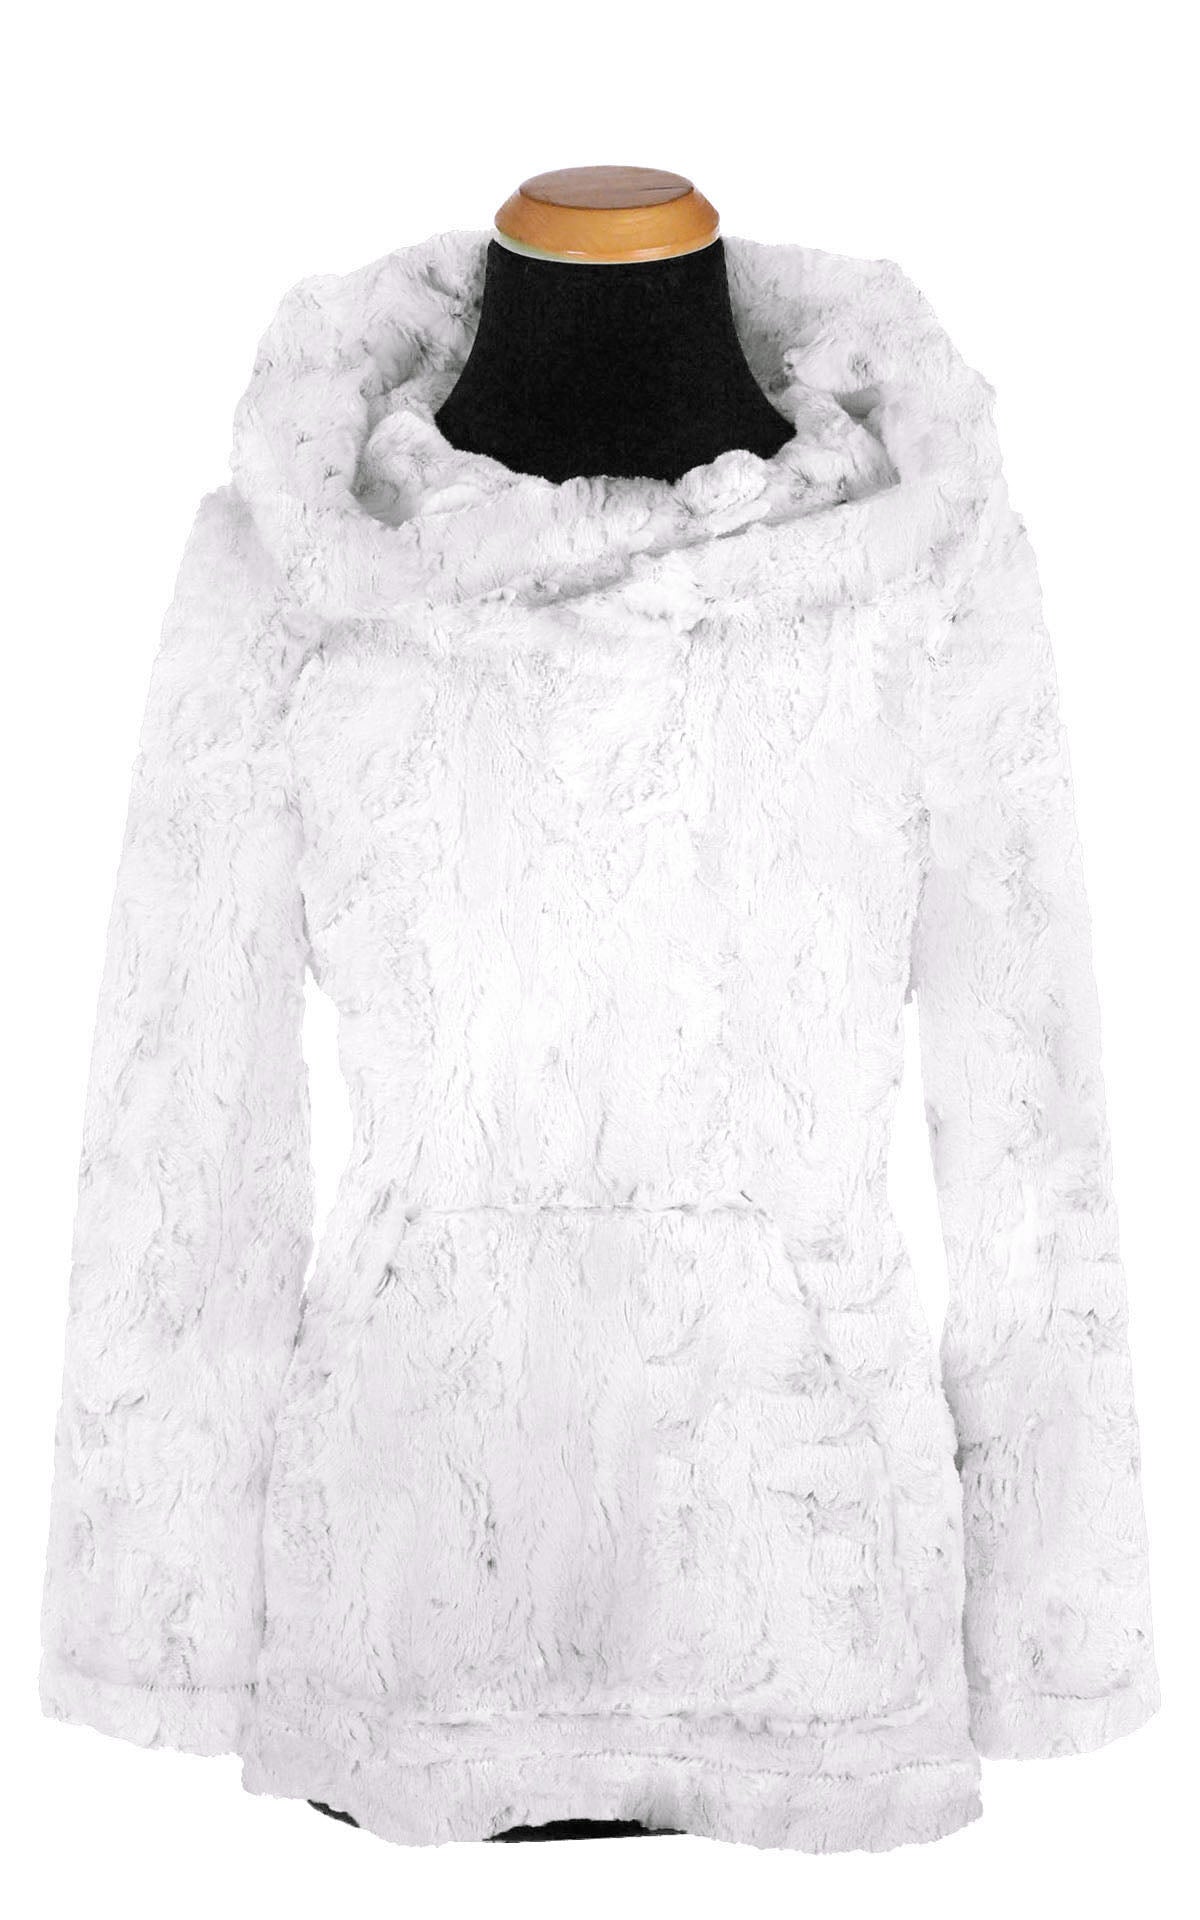 Hooded Lounger Tunic Cuddly Faux Fur in Ivory | Handmade in Seattle WA USA | Pandemonium Millinery